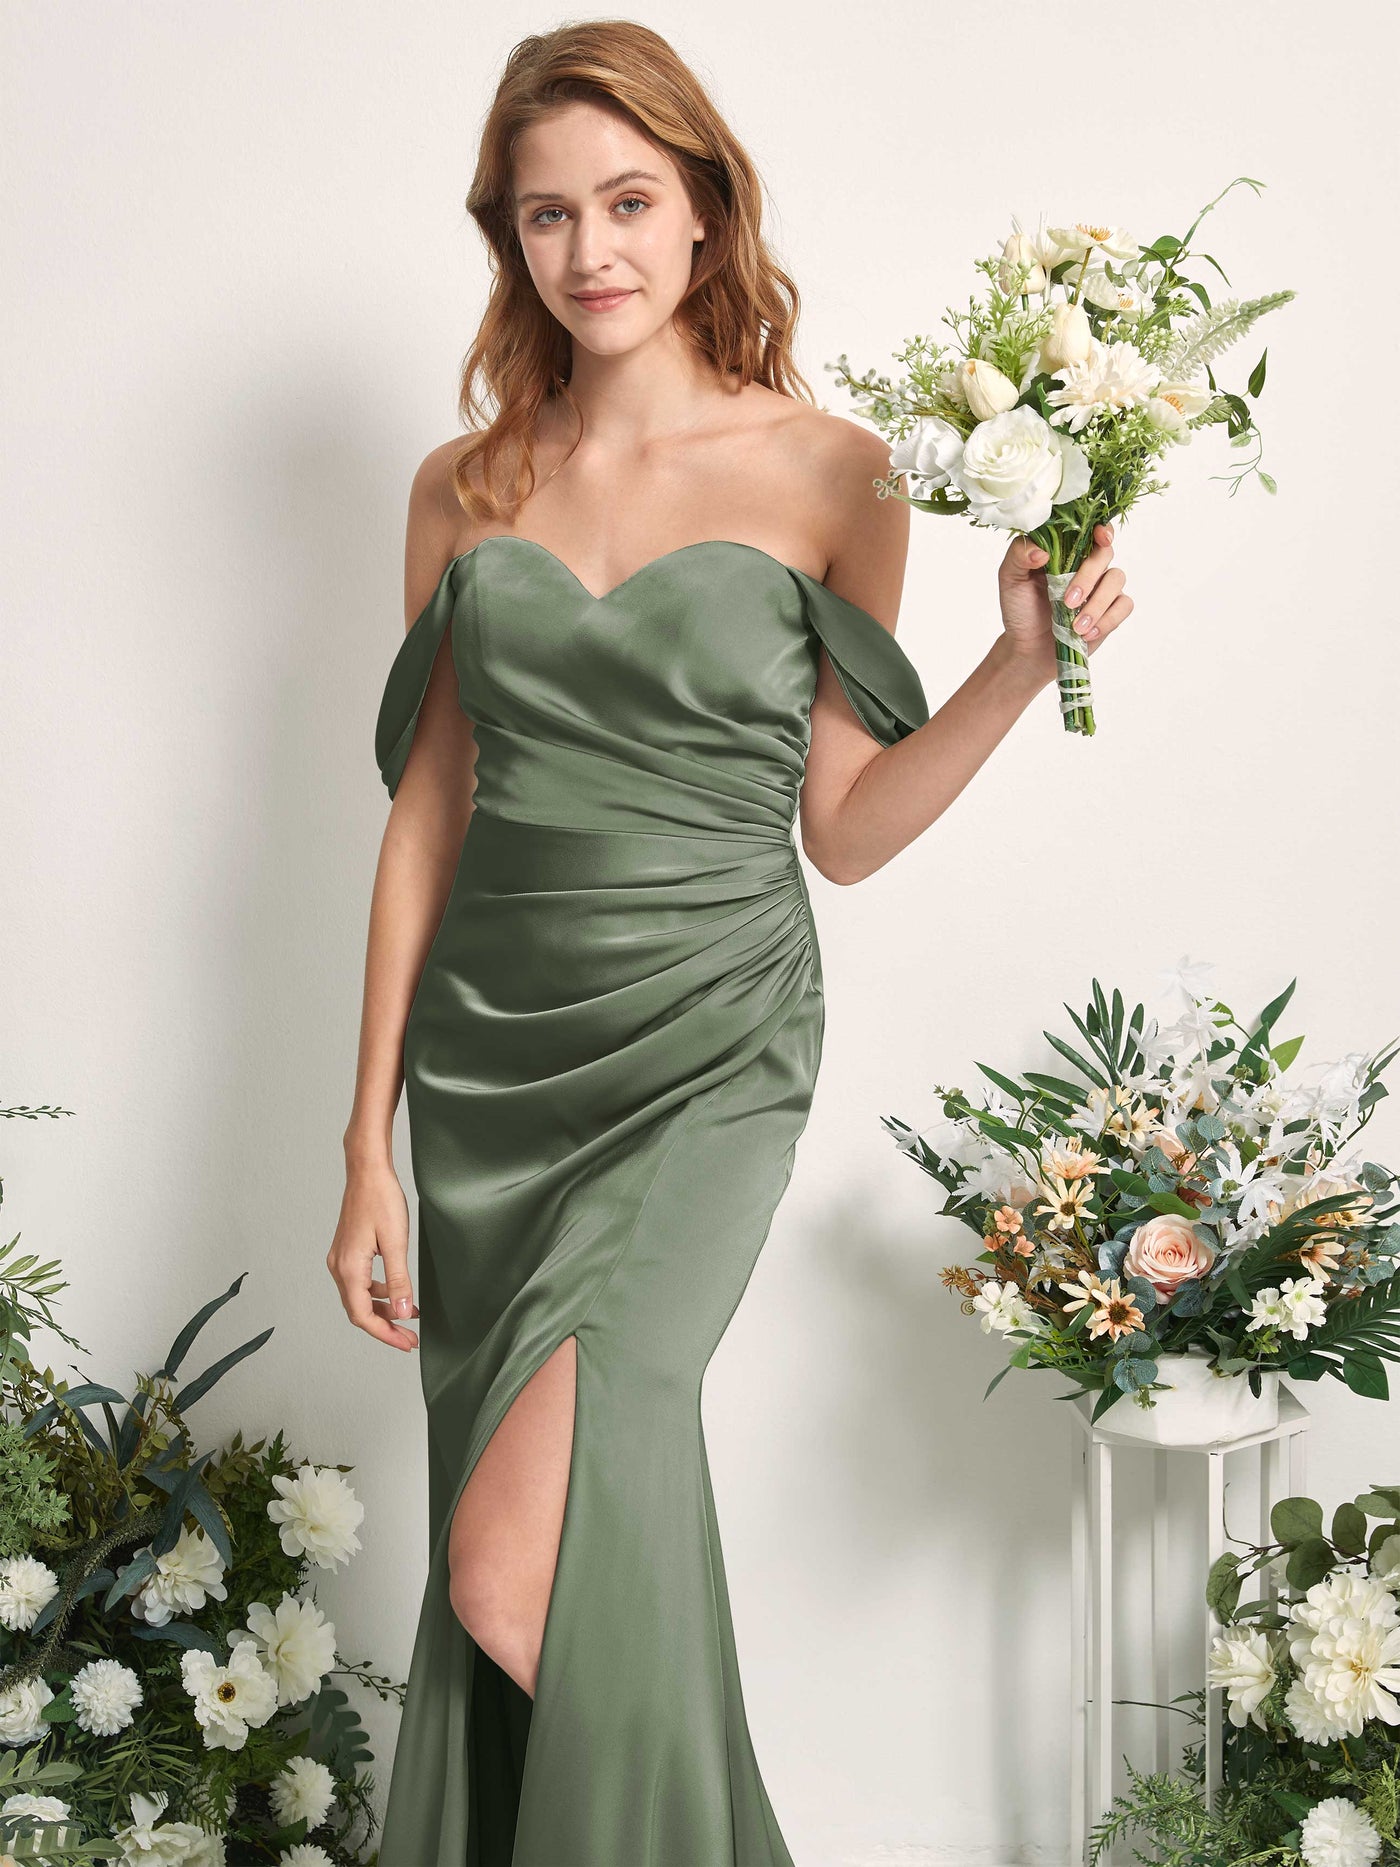 Green Olive Bridesmaid Dresses Bridesmaid Dress A-line Satin Off Shoulder Full Length Sleeveless Wedding Party Dress (80225270)#color_green-olive